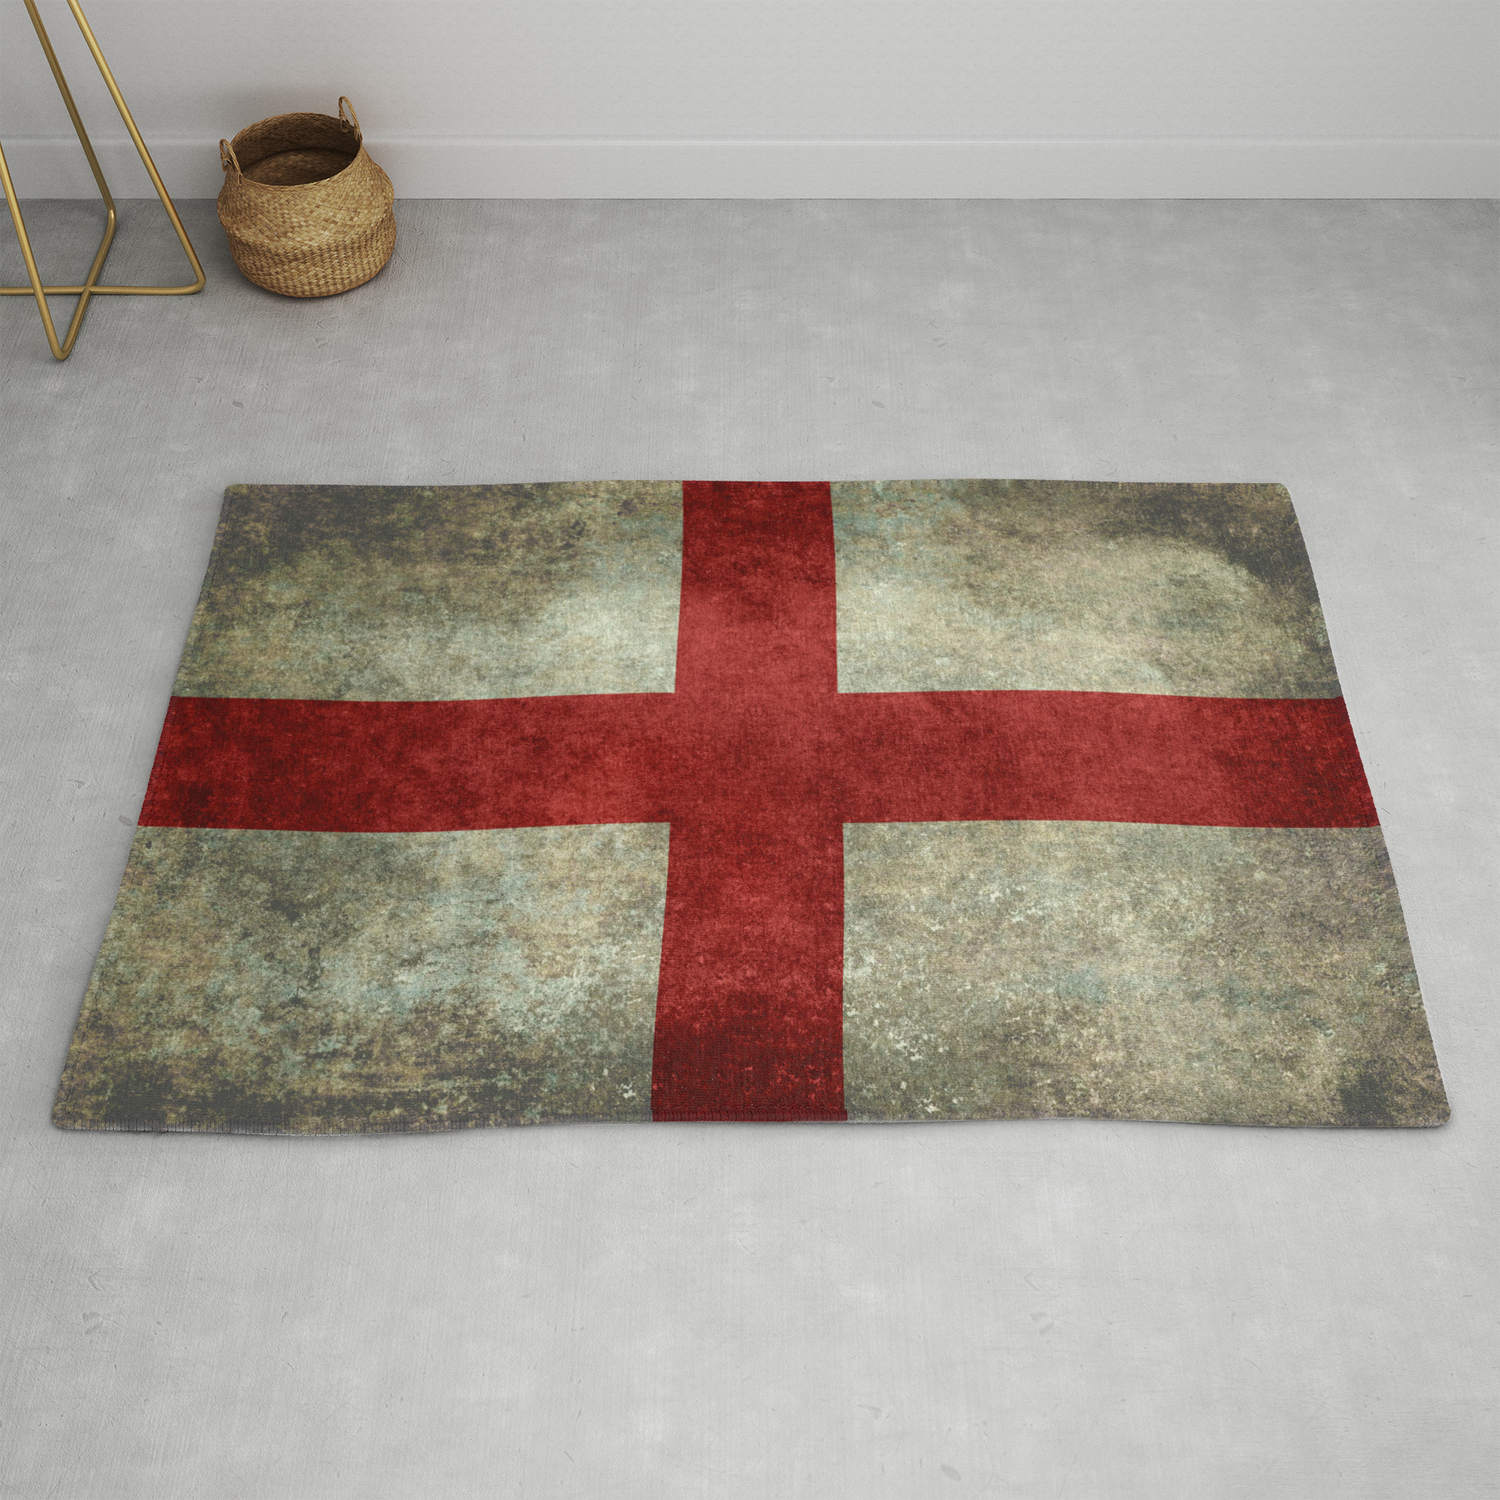 ALAZA British Flag Big Ben Bus England London Collection Area Mat Rug Rugs for Living Room Bedroom Kitchen 2' x 6' 